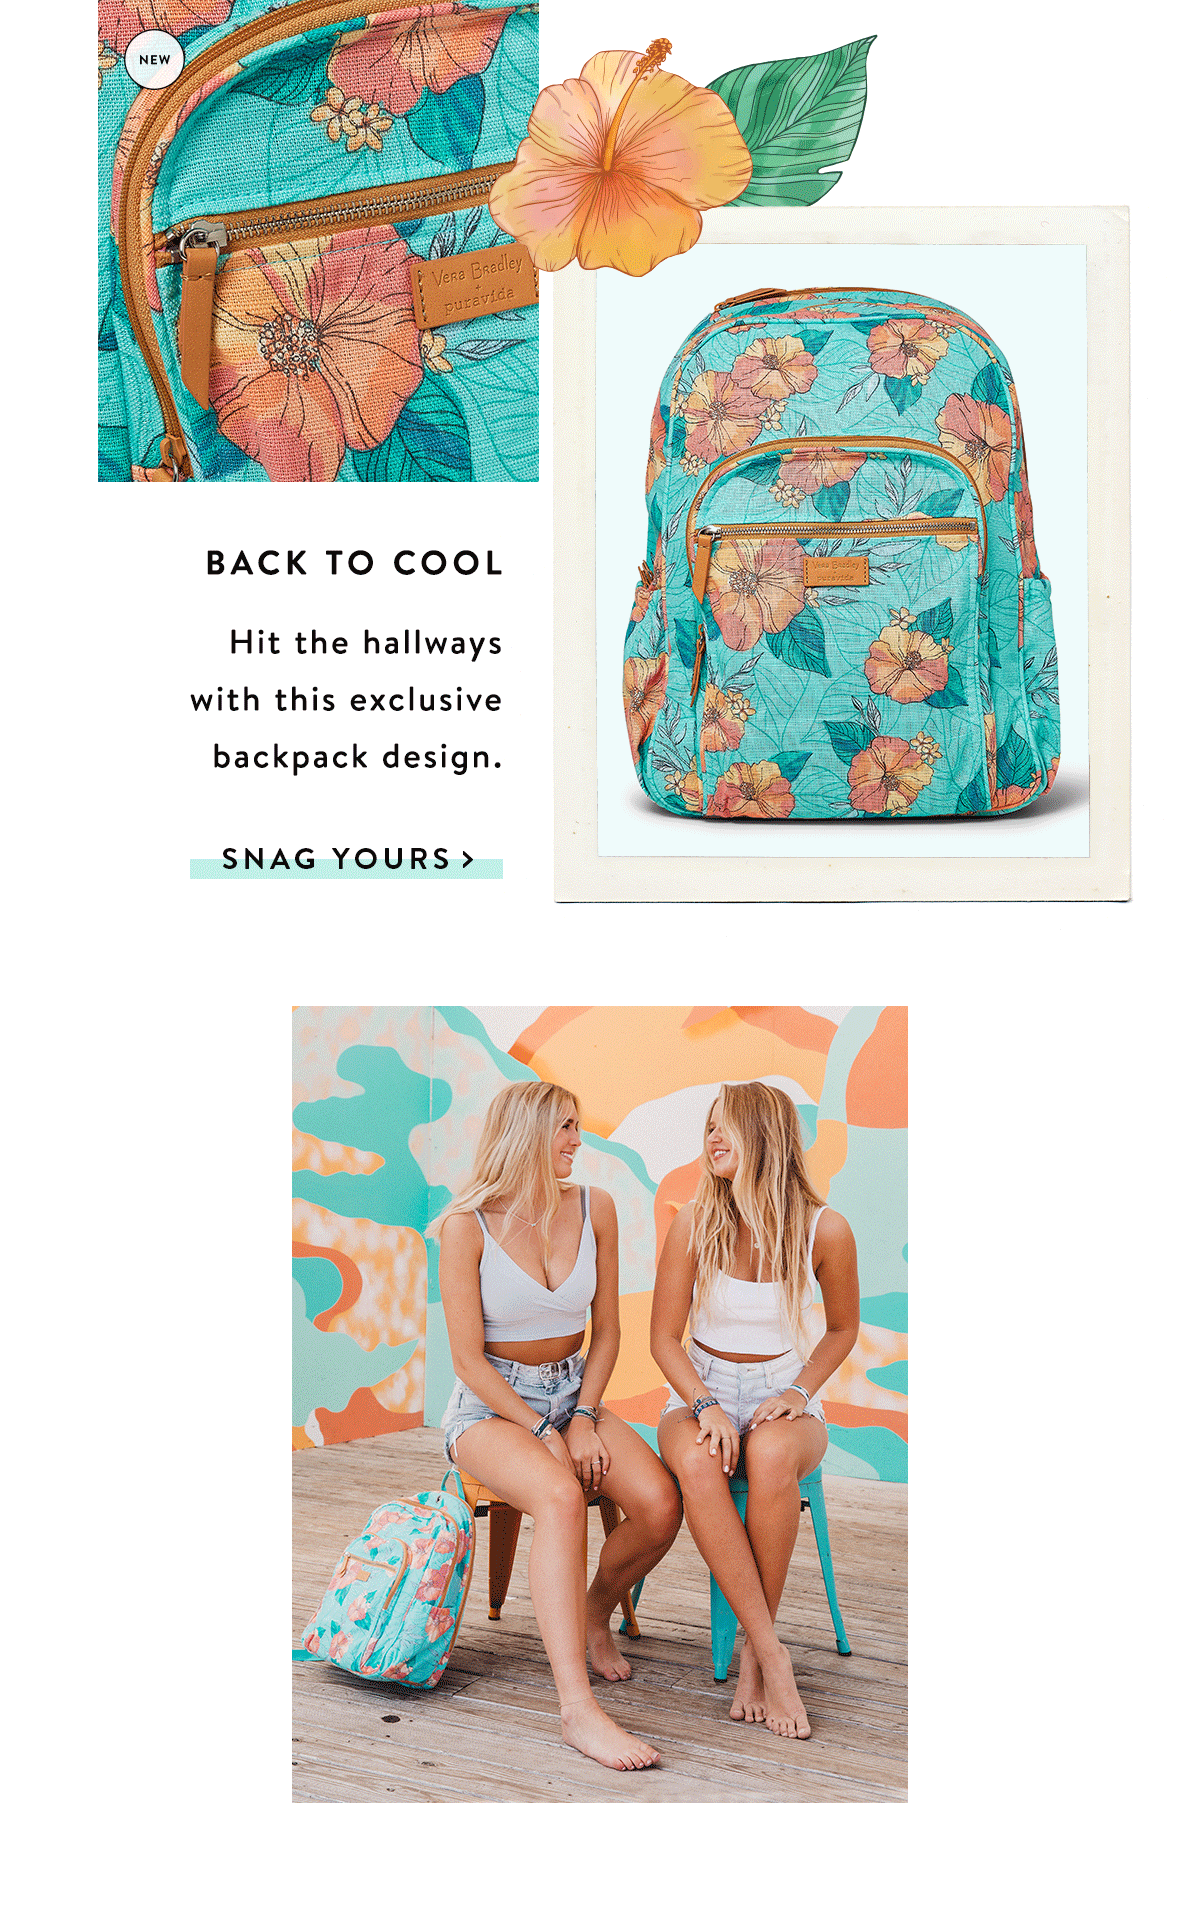 Back to Cool | SNAG YOURS >